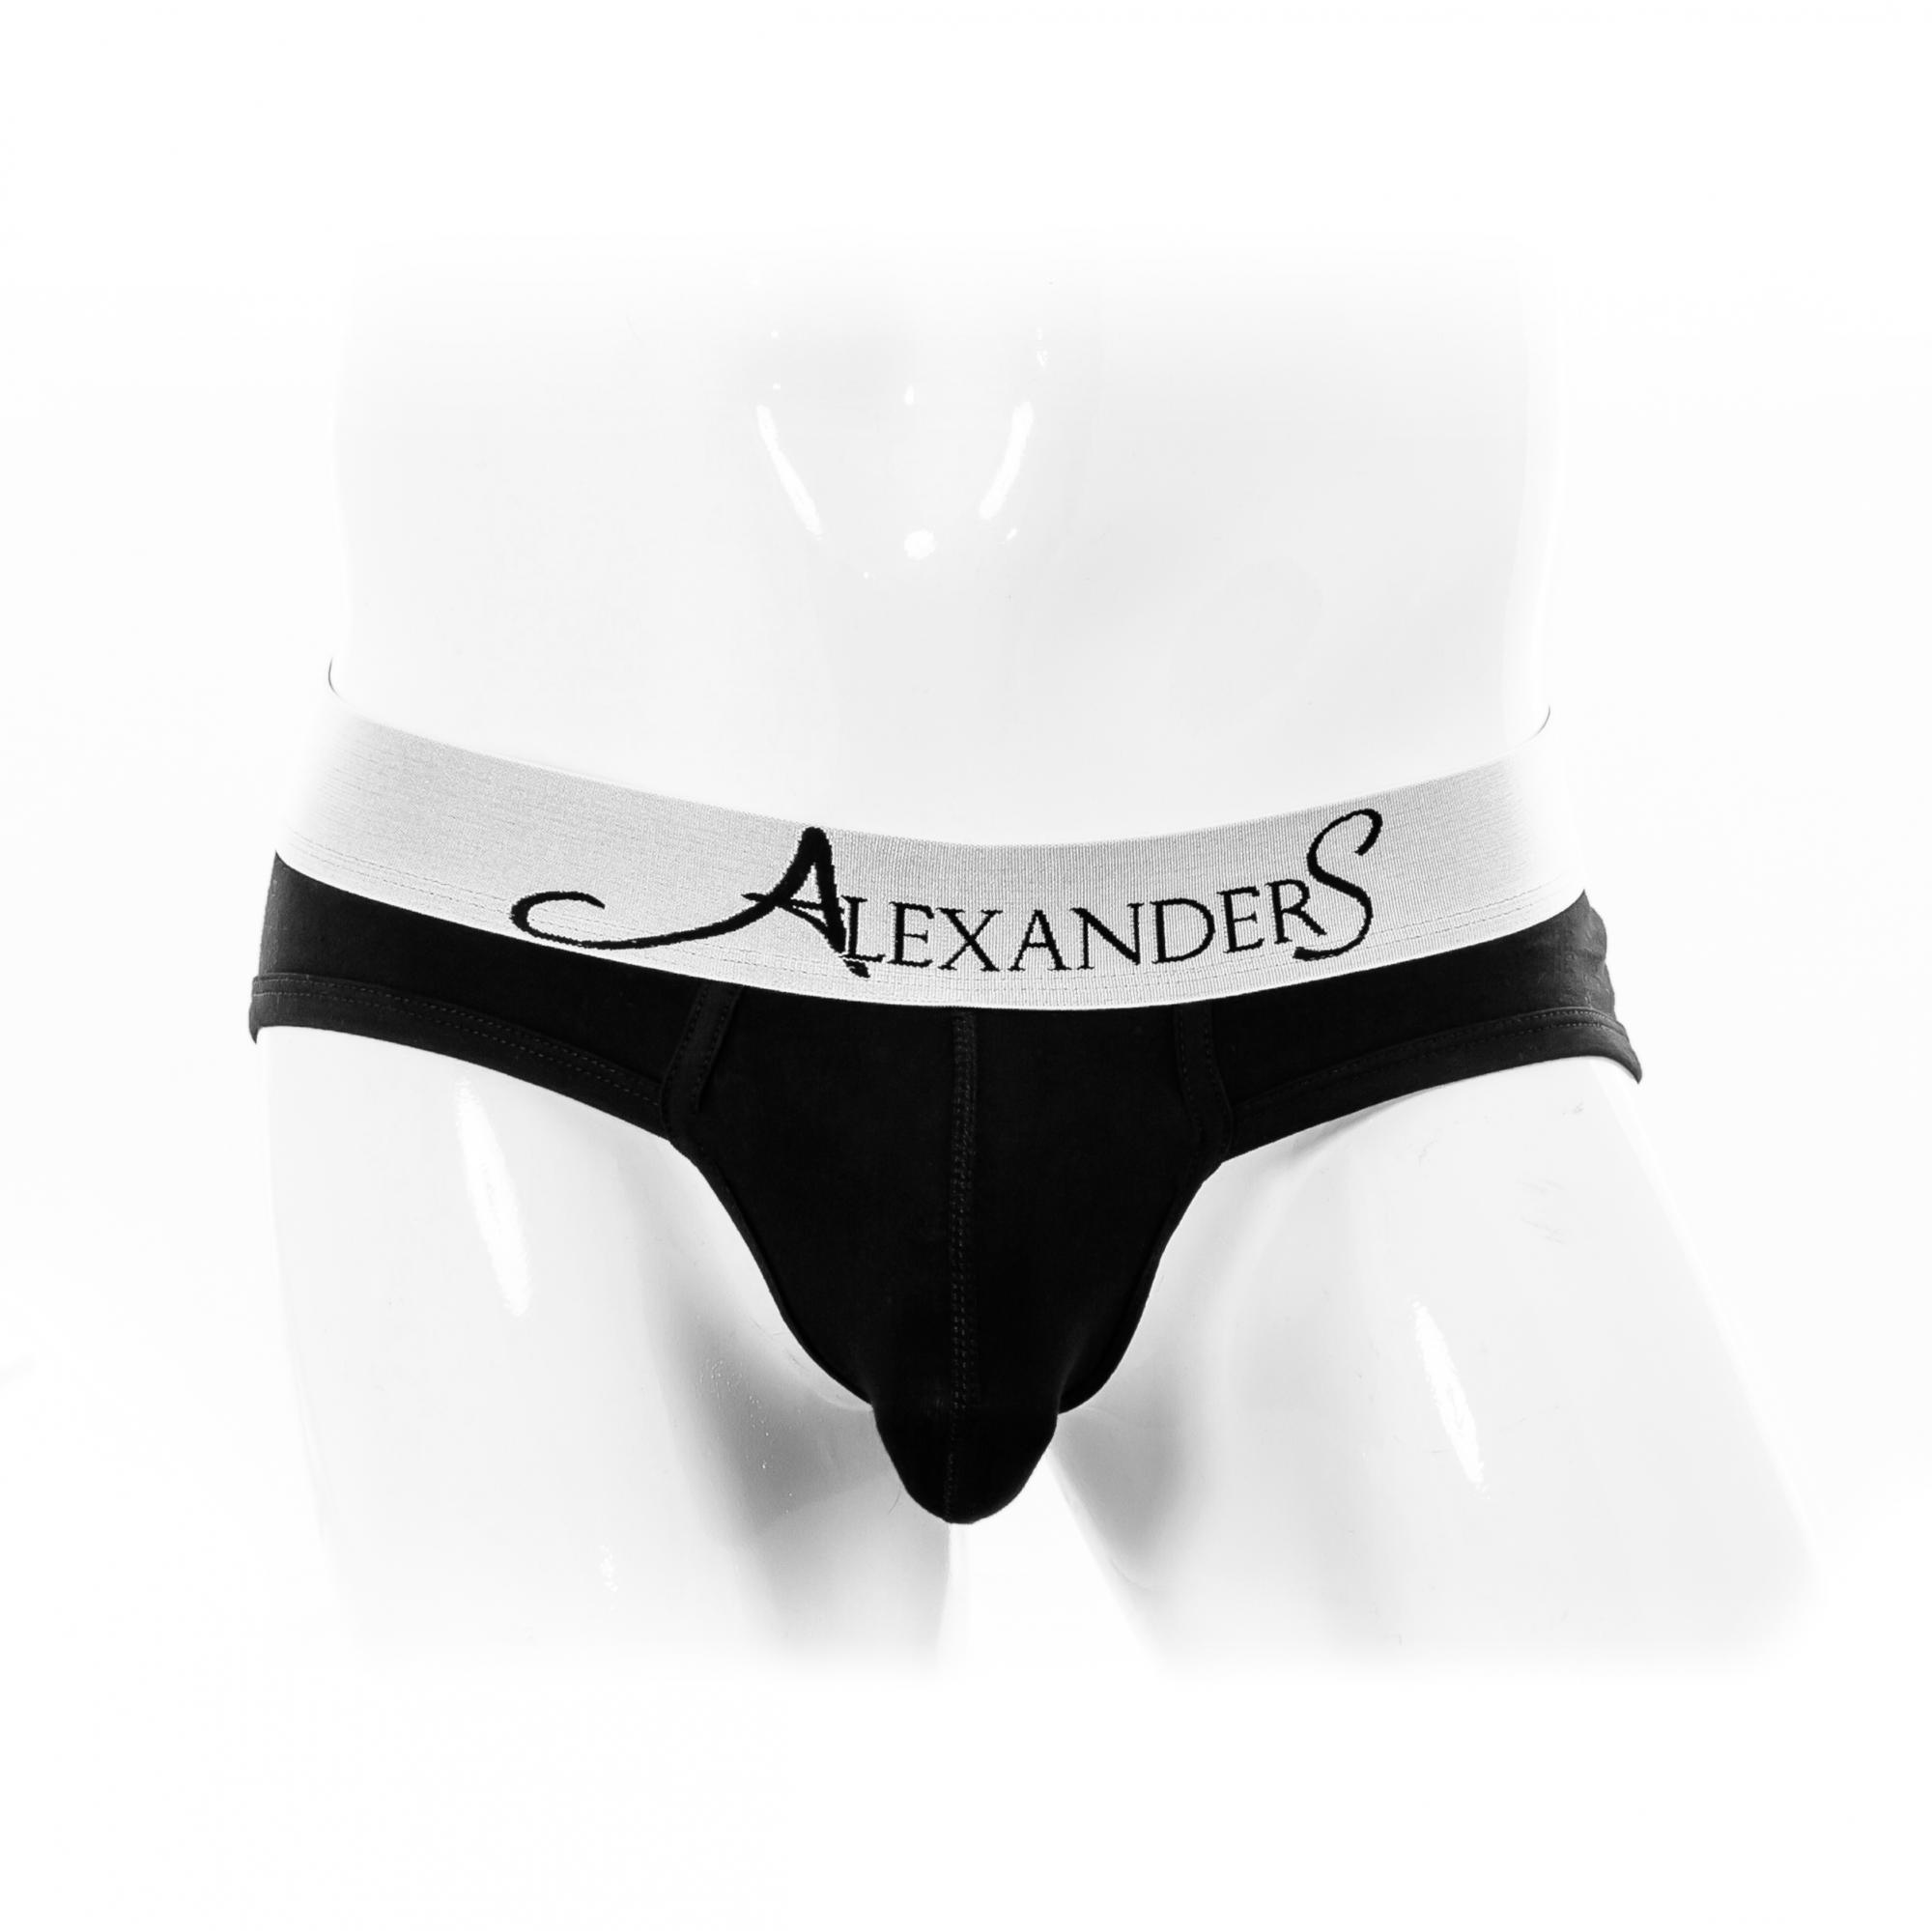 Shop men's underwear online in Australia at AlexanderS, Australia's online men's underwear store with trunks, briefs, jockstraps, g-strings and more.